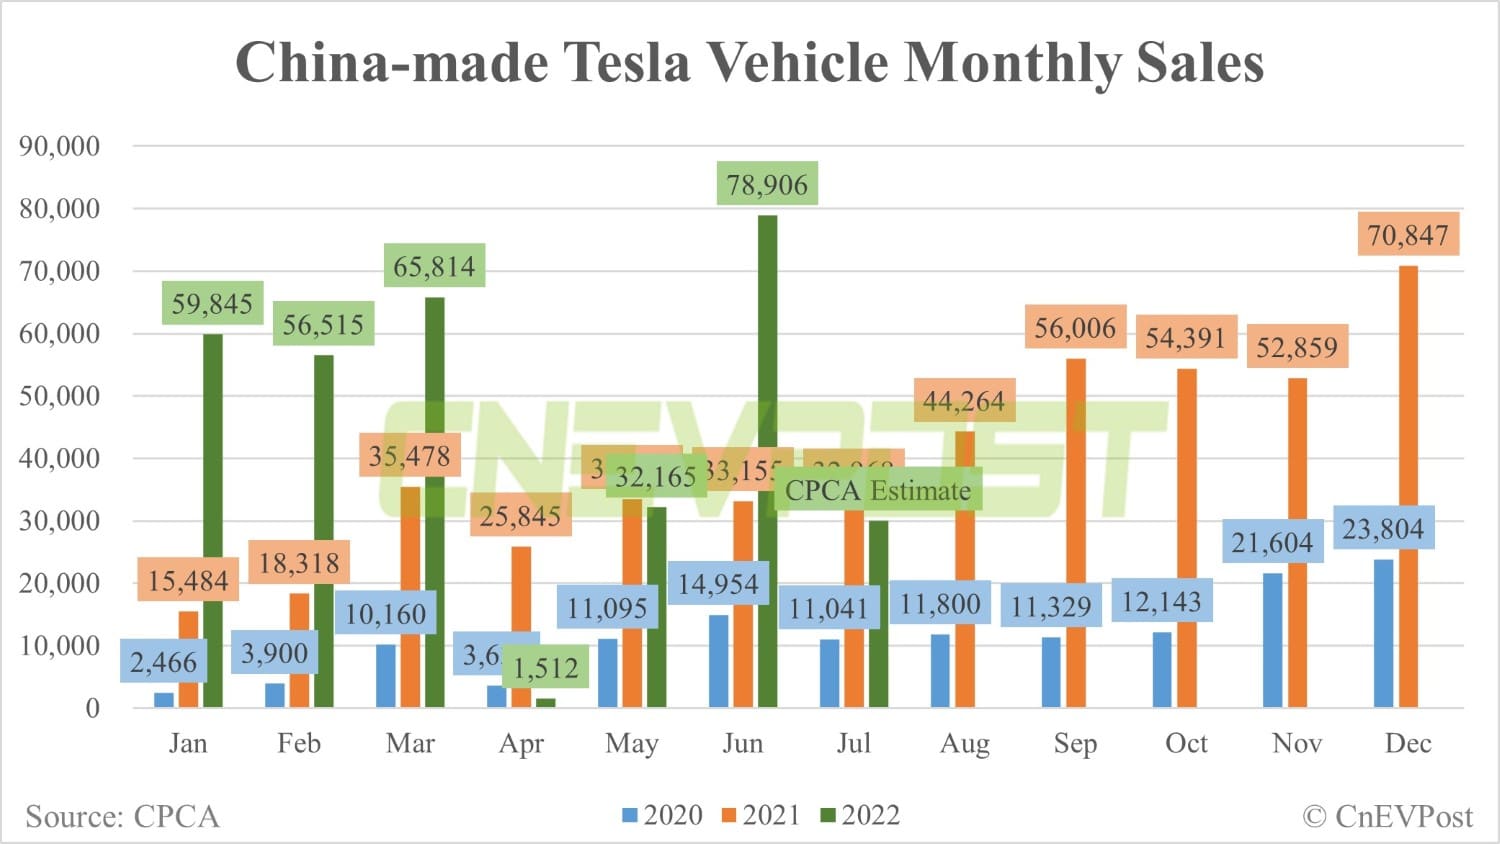 Tesla sells 30,000 China-made vehicles in July, CPCA estimate shows-CnEVPost